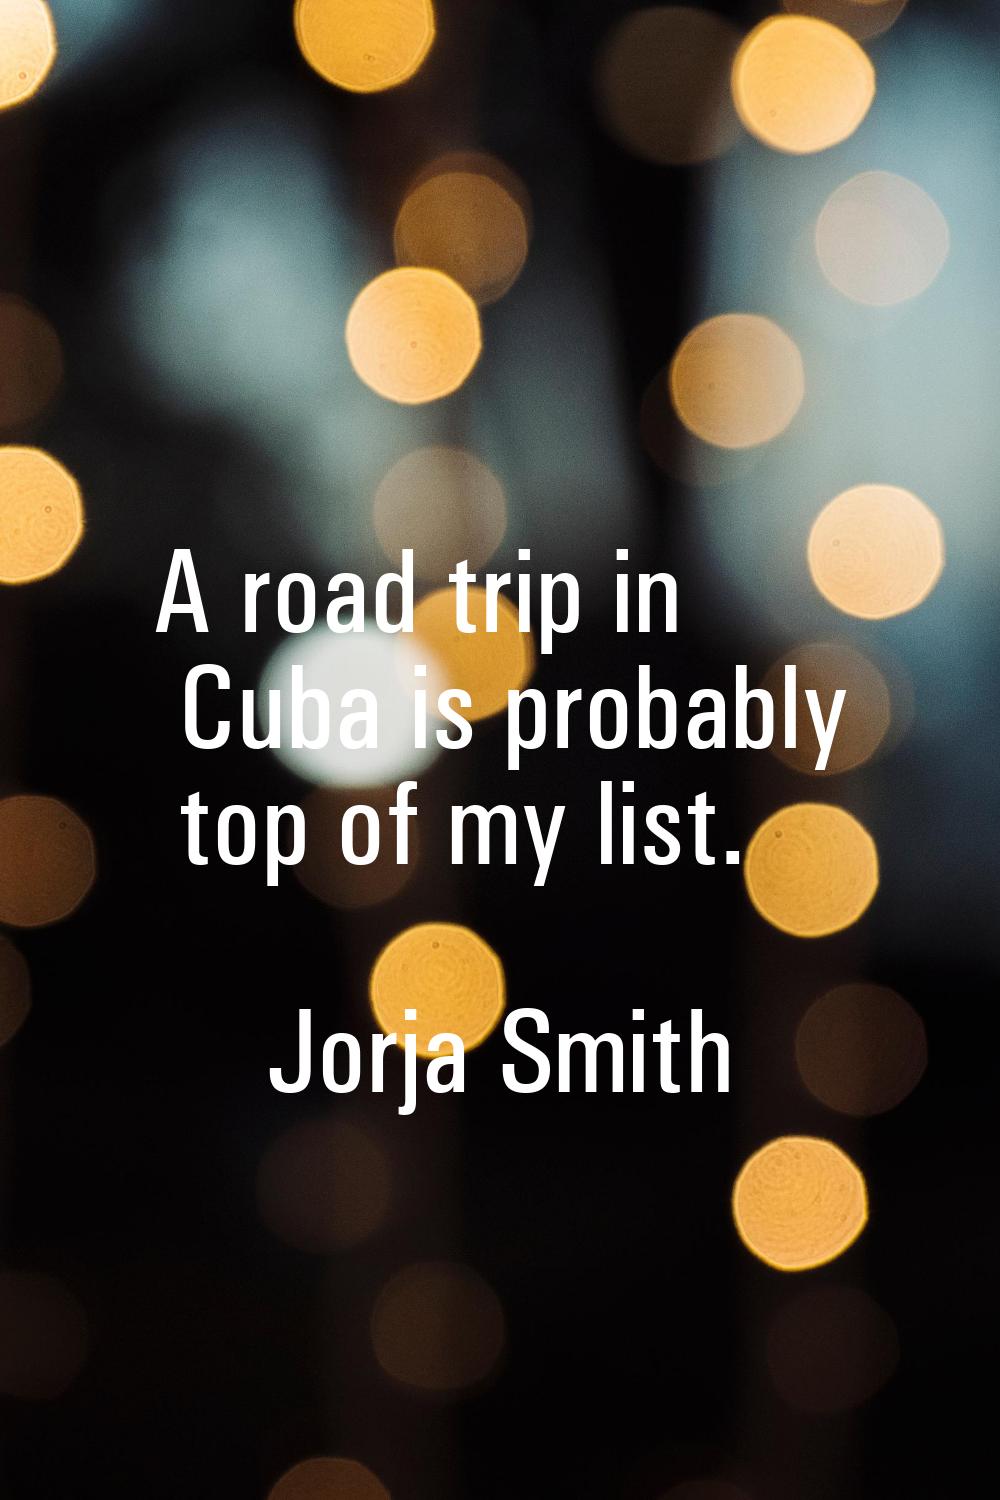 A road trip in Cuba is probably top of my list.